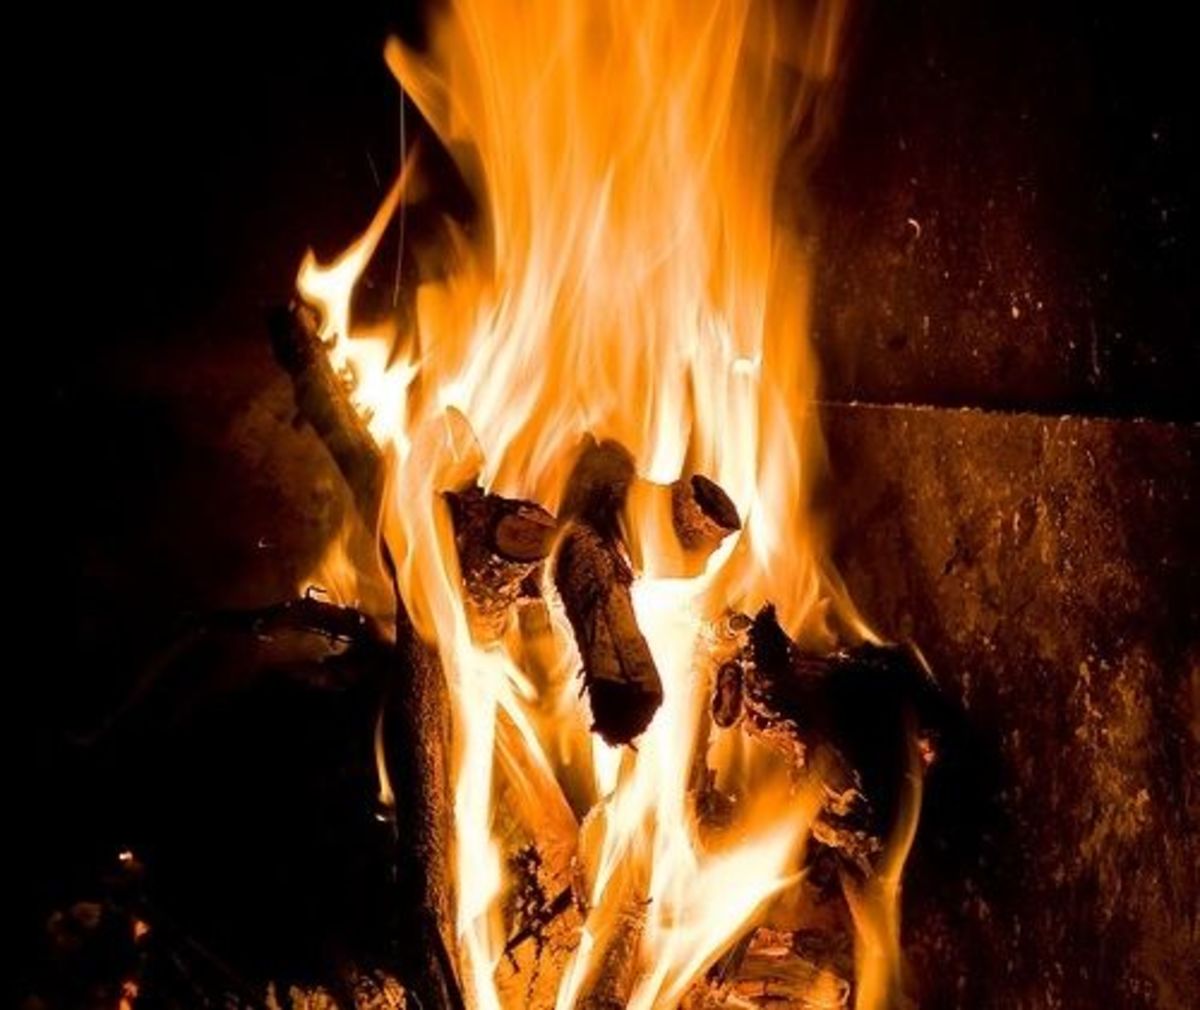 Clean Your Fireplace With Potato Peels